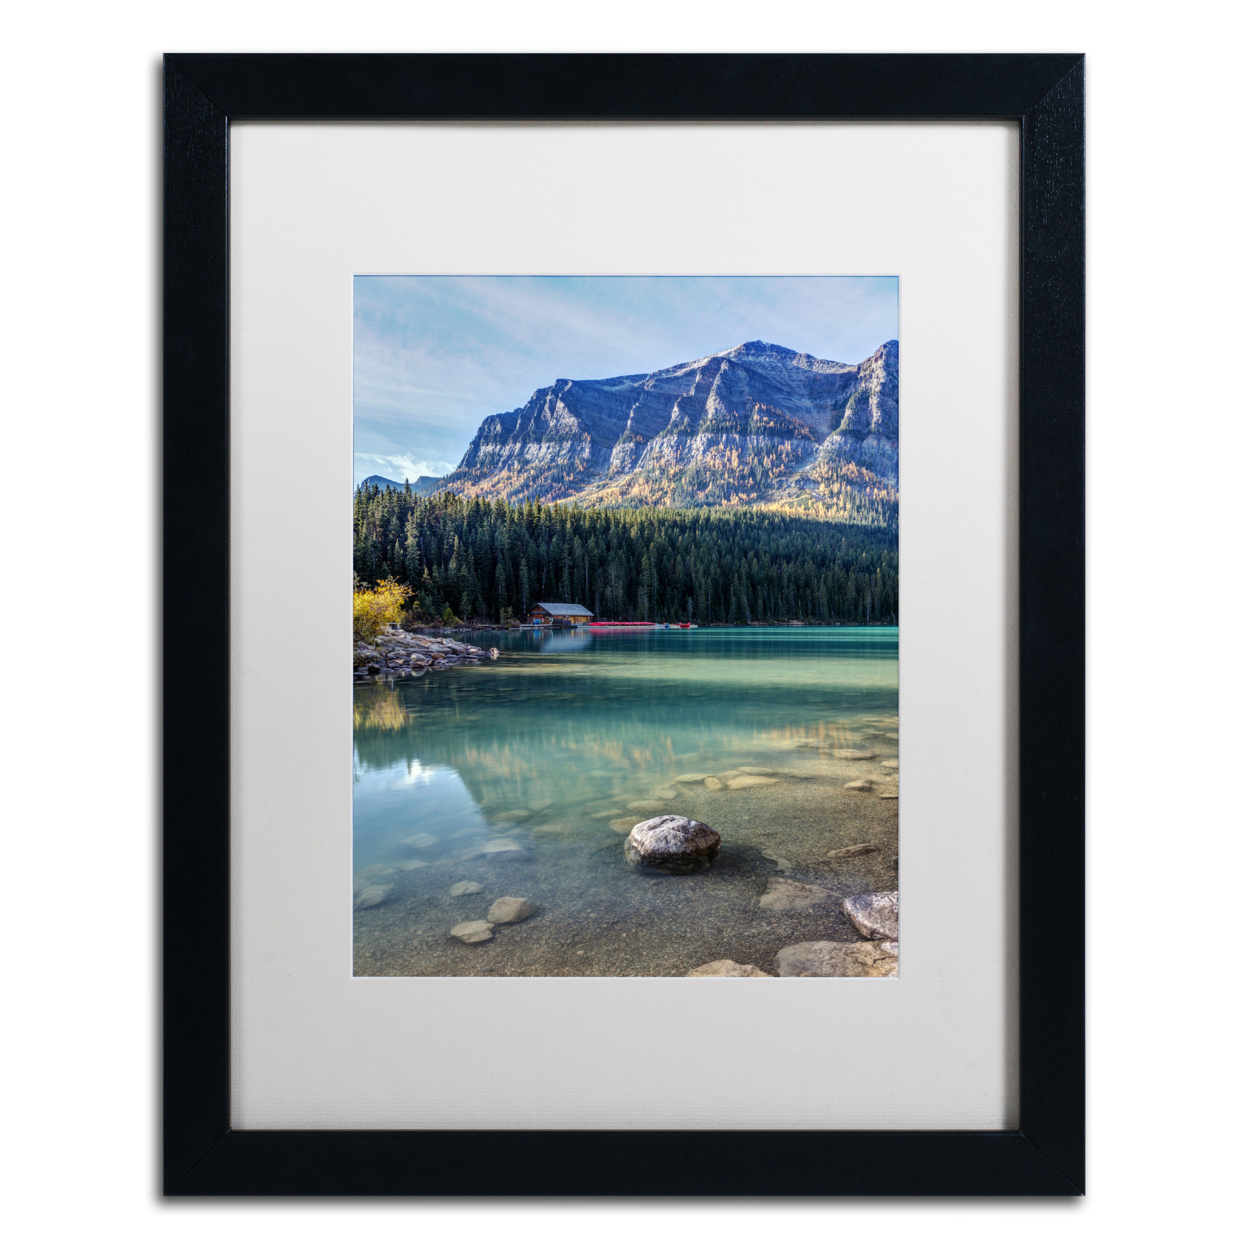 Pierre Leclerc 'Cabin At Lake Louise' Black Wooden Framed Art 18 X 22 Inches